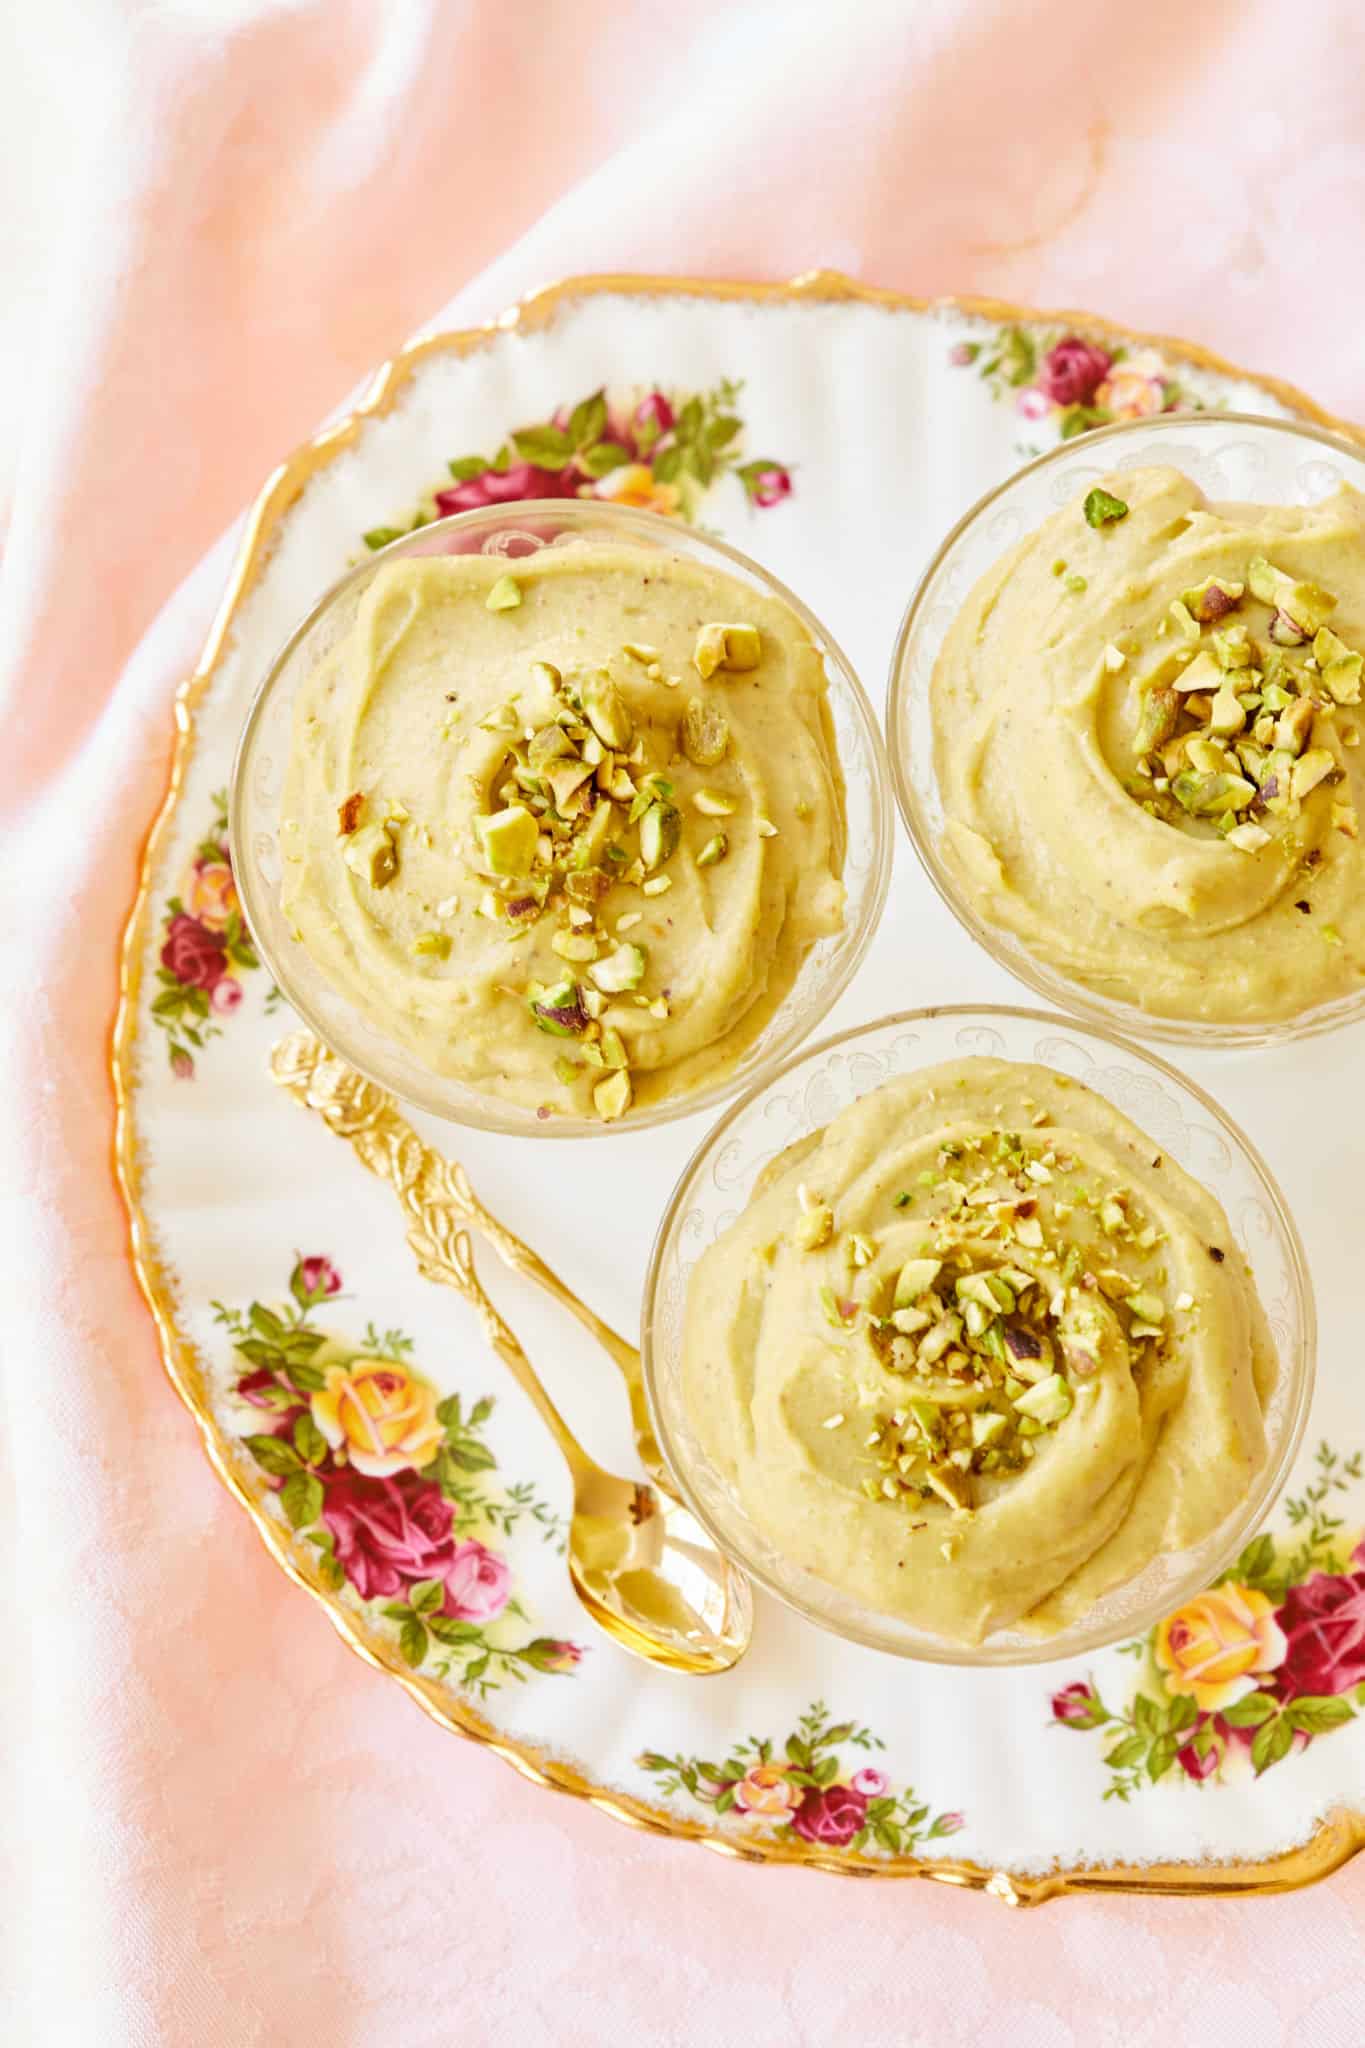 Top-down view of pistachio pudding